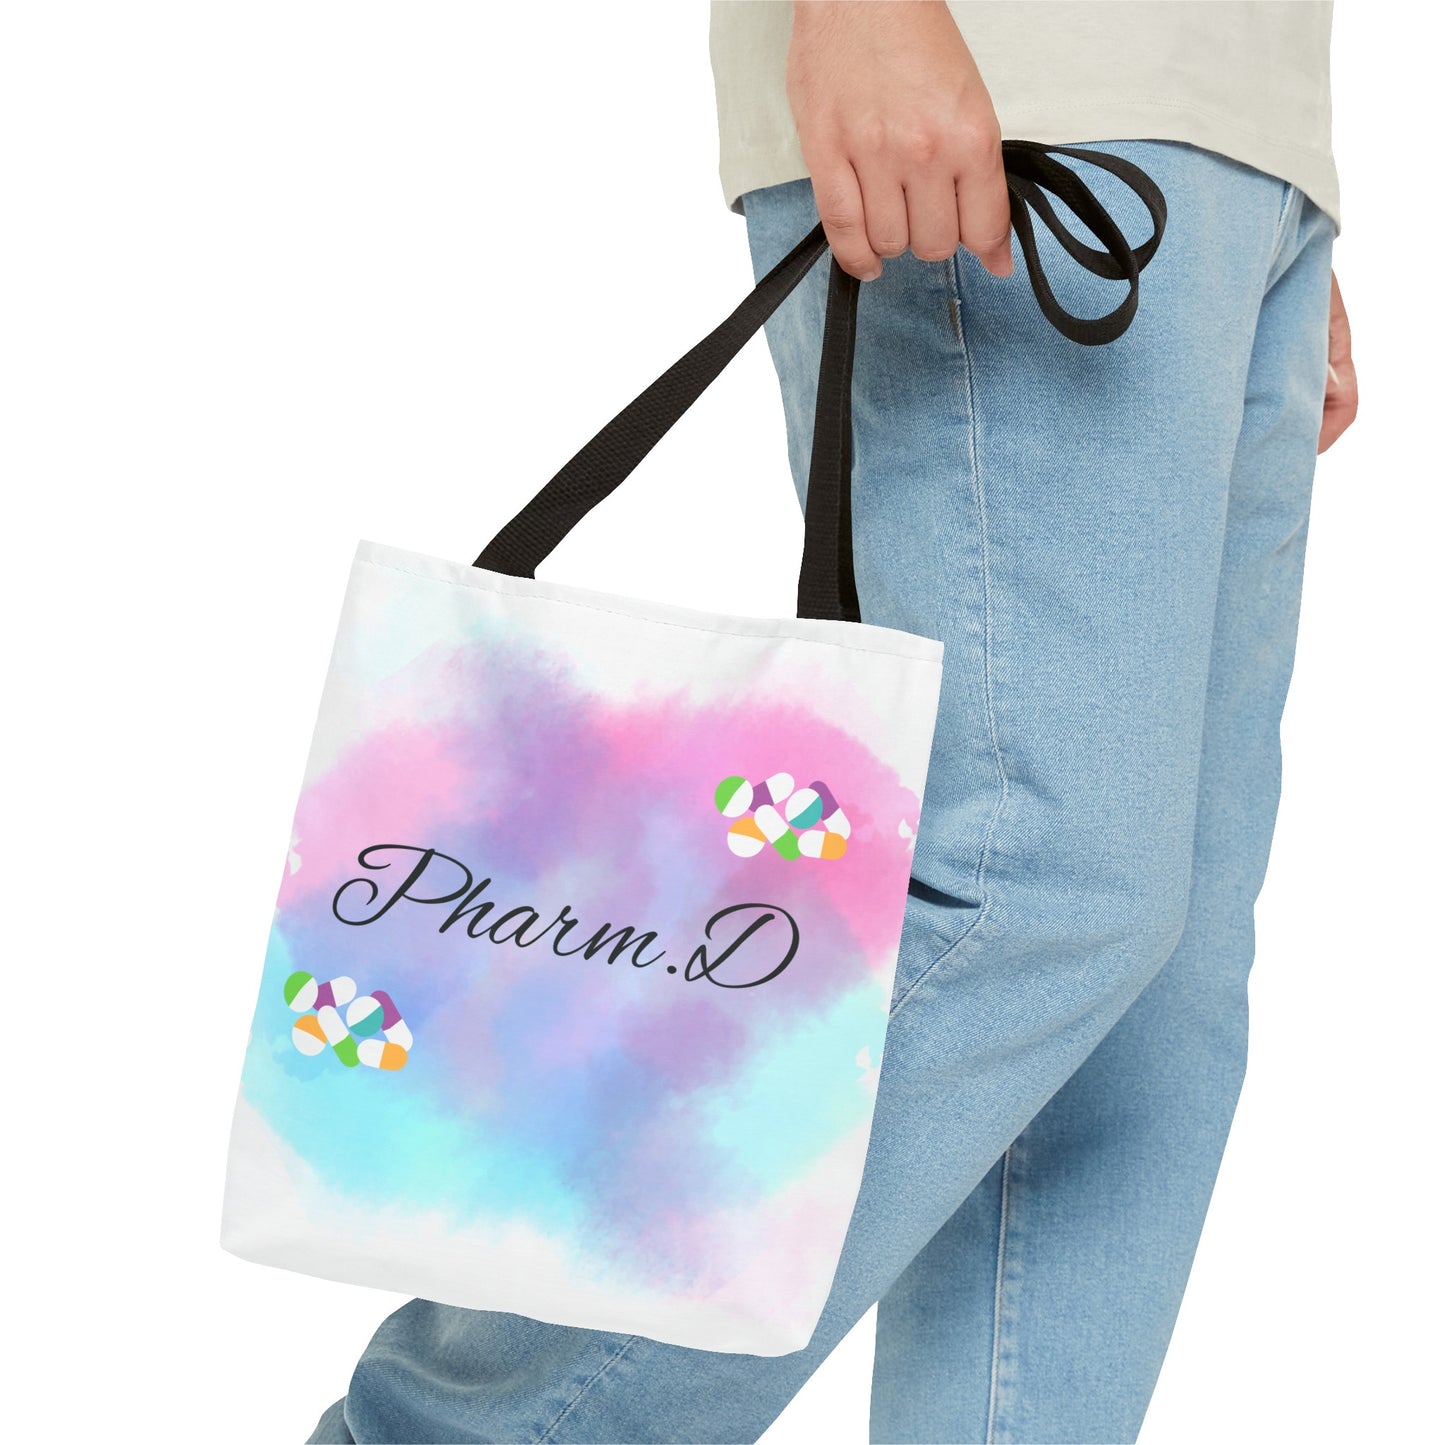 Pharm.D.- Tote Bag Doctor of Pharmacy Credentials